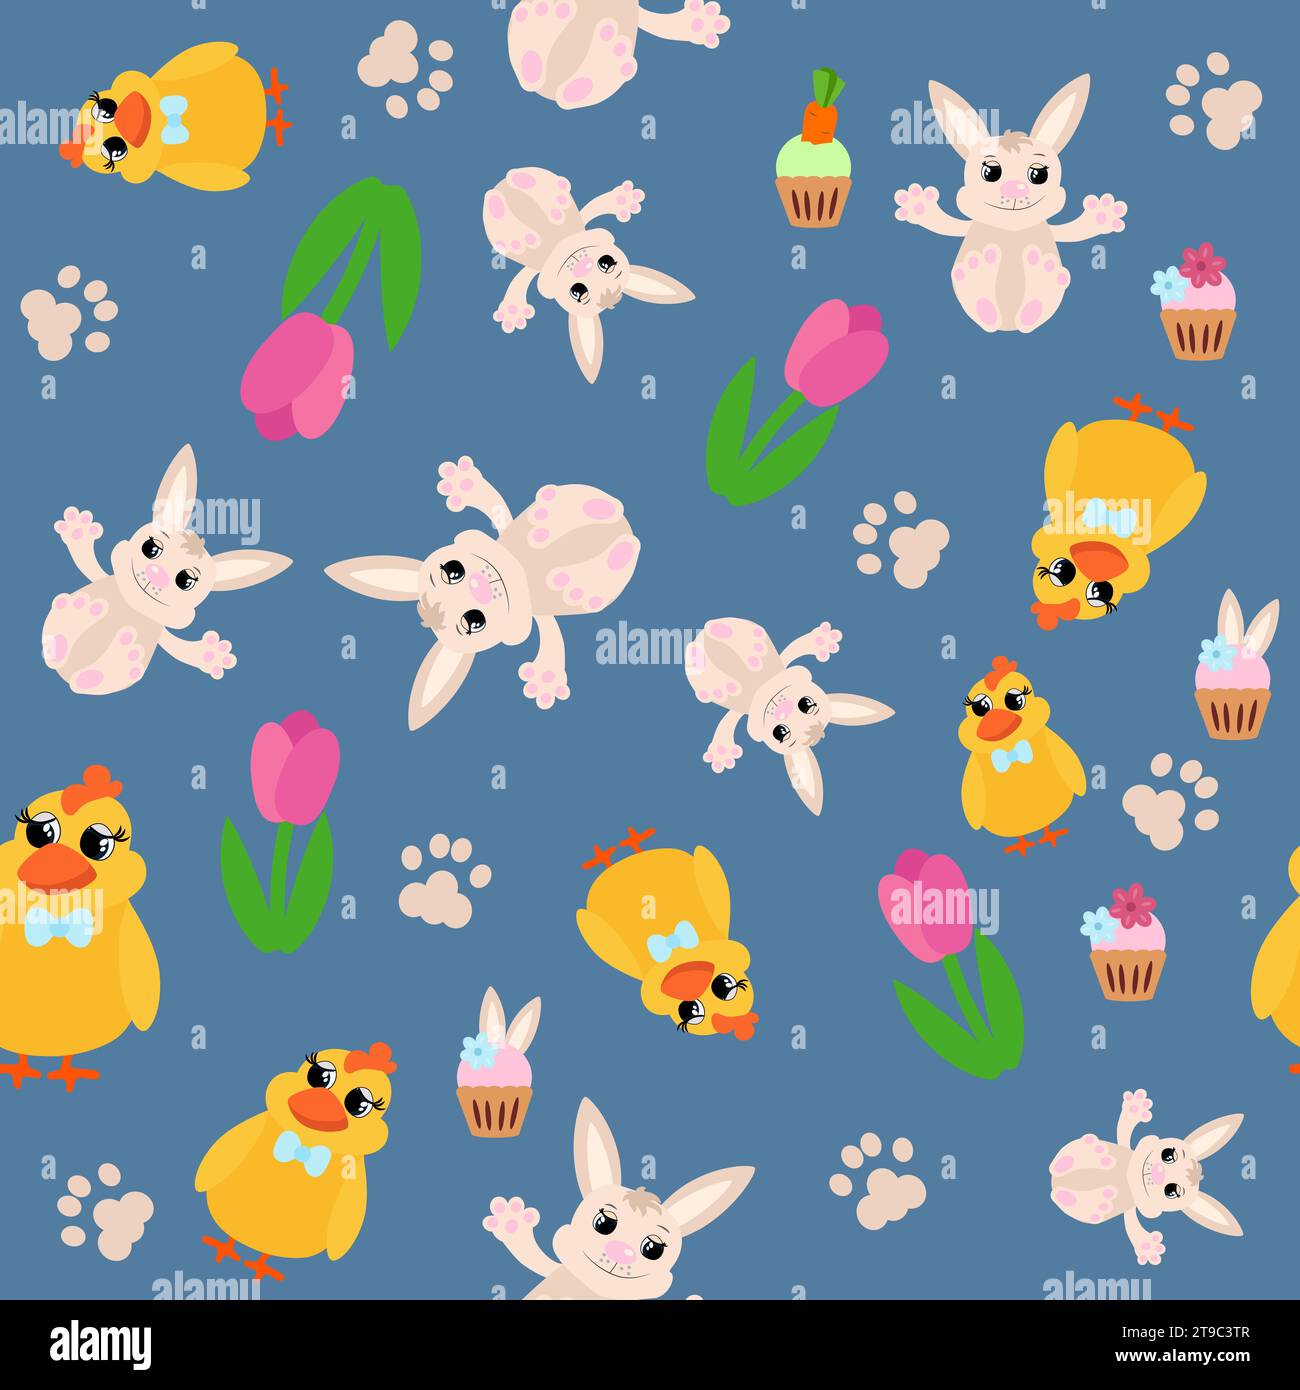 Seamless pattern spring tulips, chick and easter bunny. Easter ornament for children's textiles, packaging, background design in cartoon style. Stock Vector